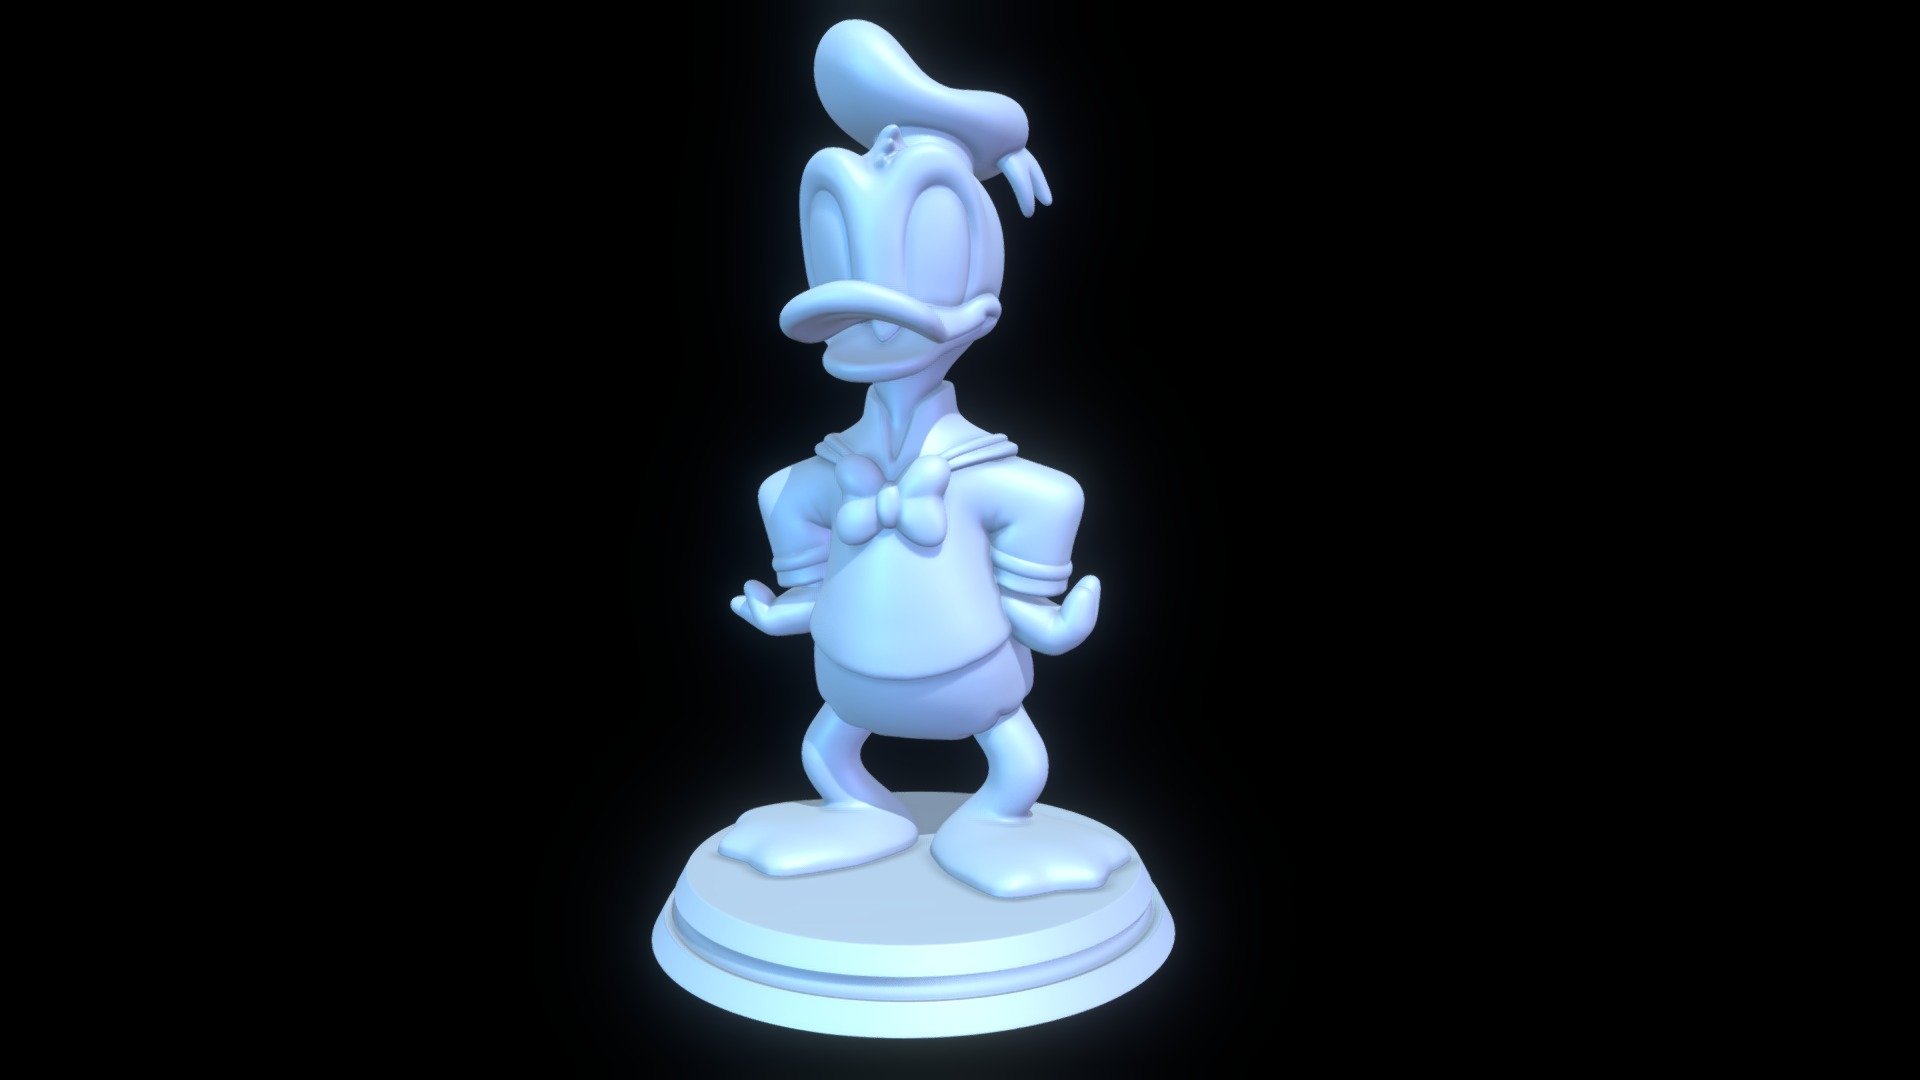 Donald Duck 3d Print Buy Royalty Free 3d Model By Sillytoys 2306157 Sketchfab Store